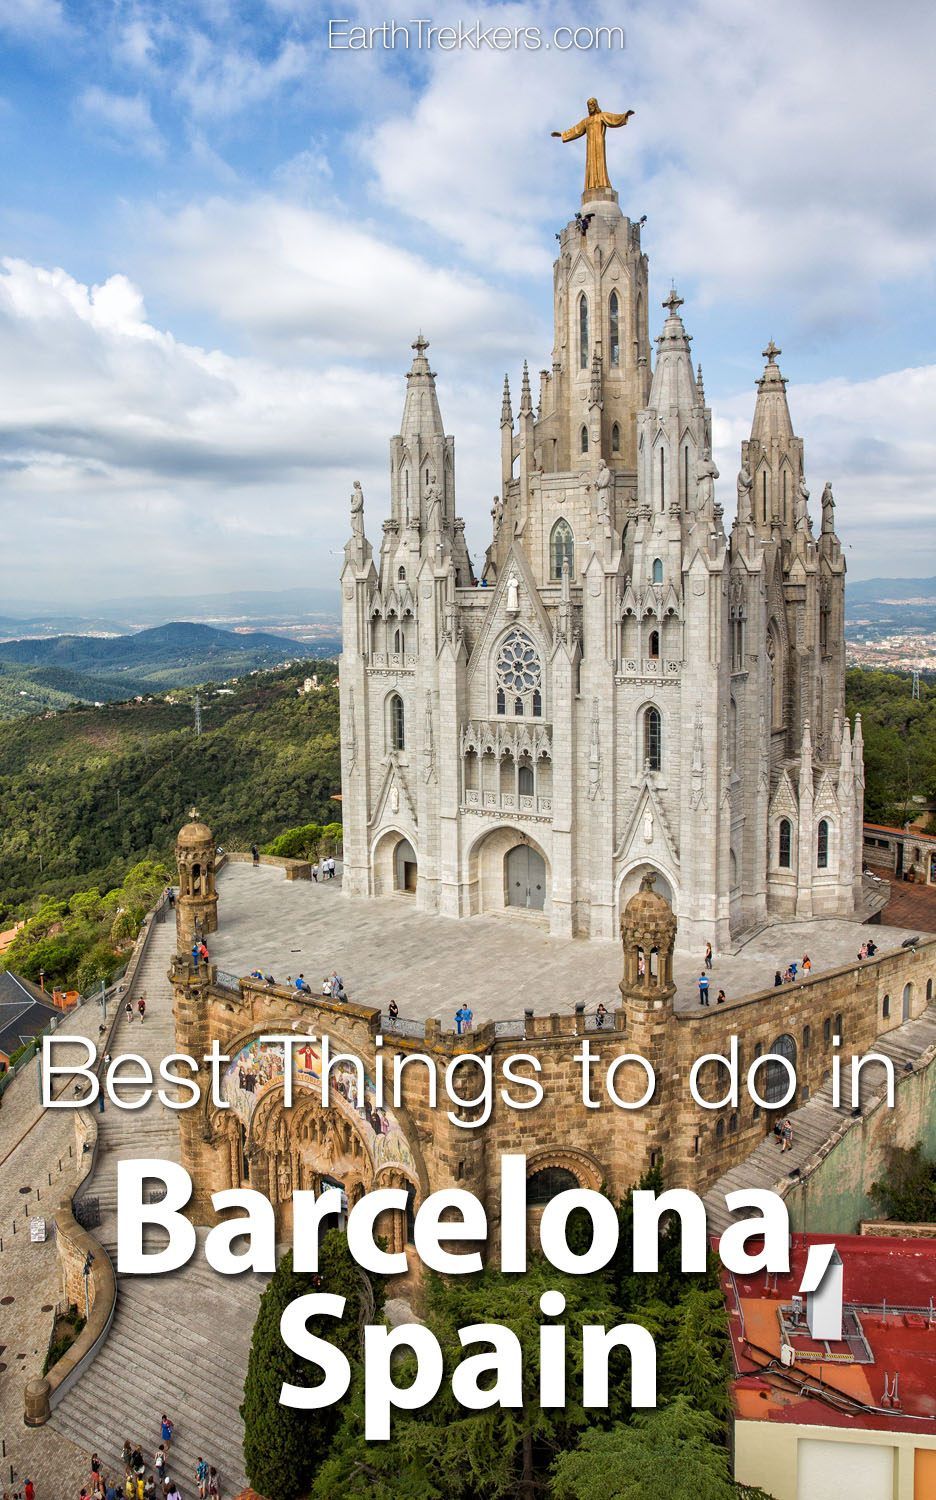 Best things to do in Barcelona Spain